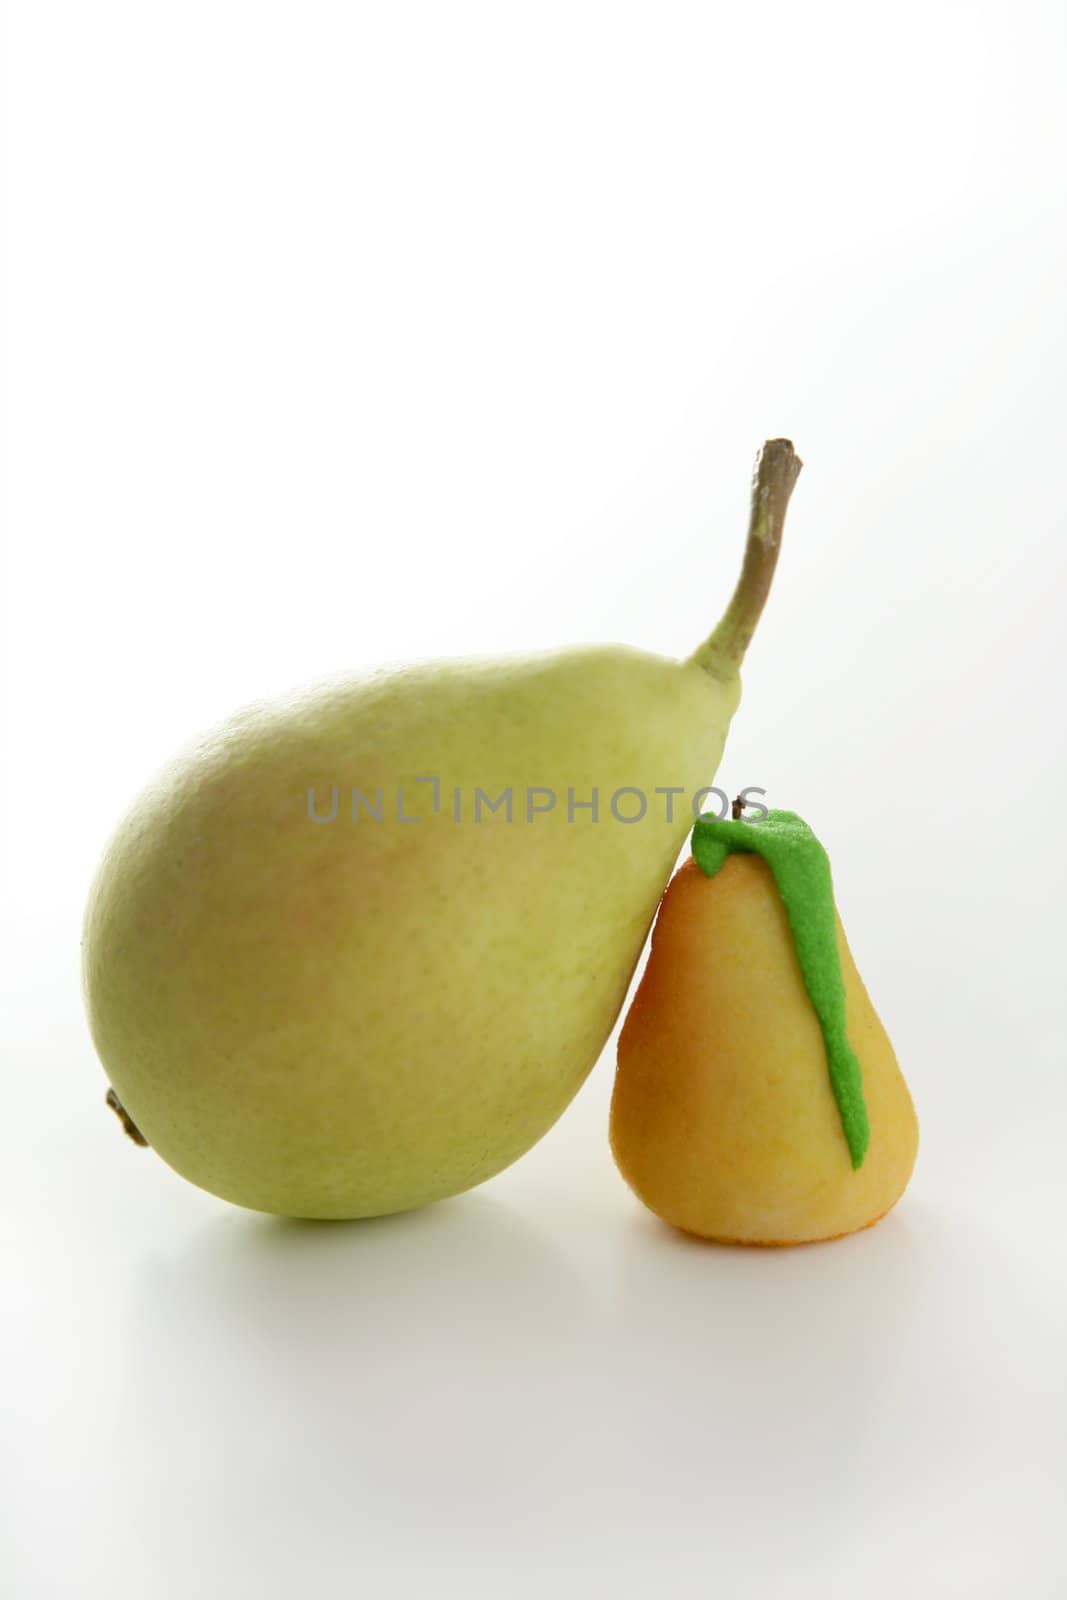 Pears over white background by lunamarina